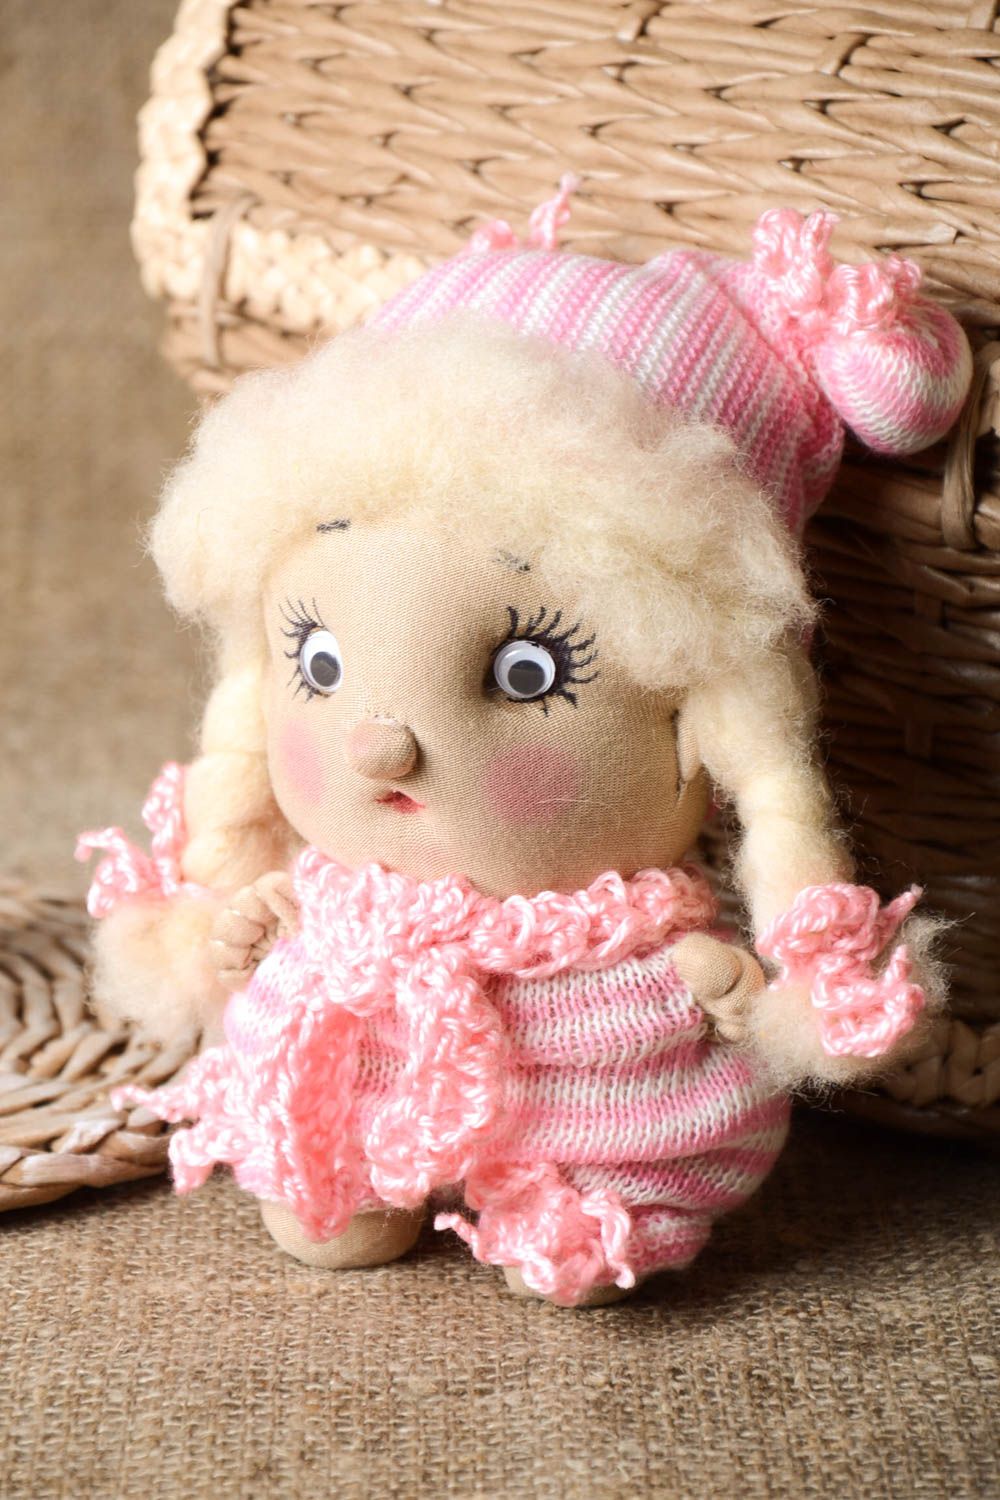 Handmade toy for baby unusual doll for kids decor ideas designer doll photo 1